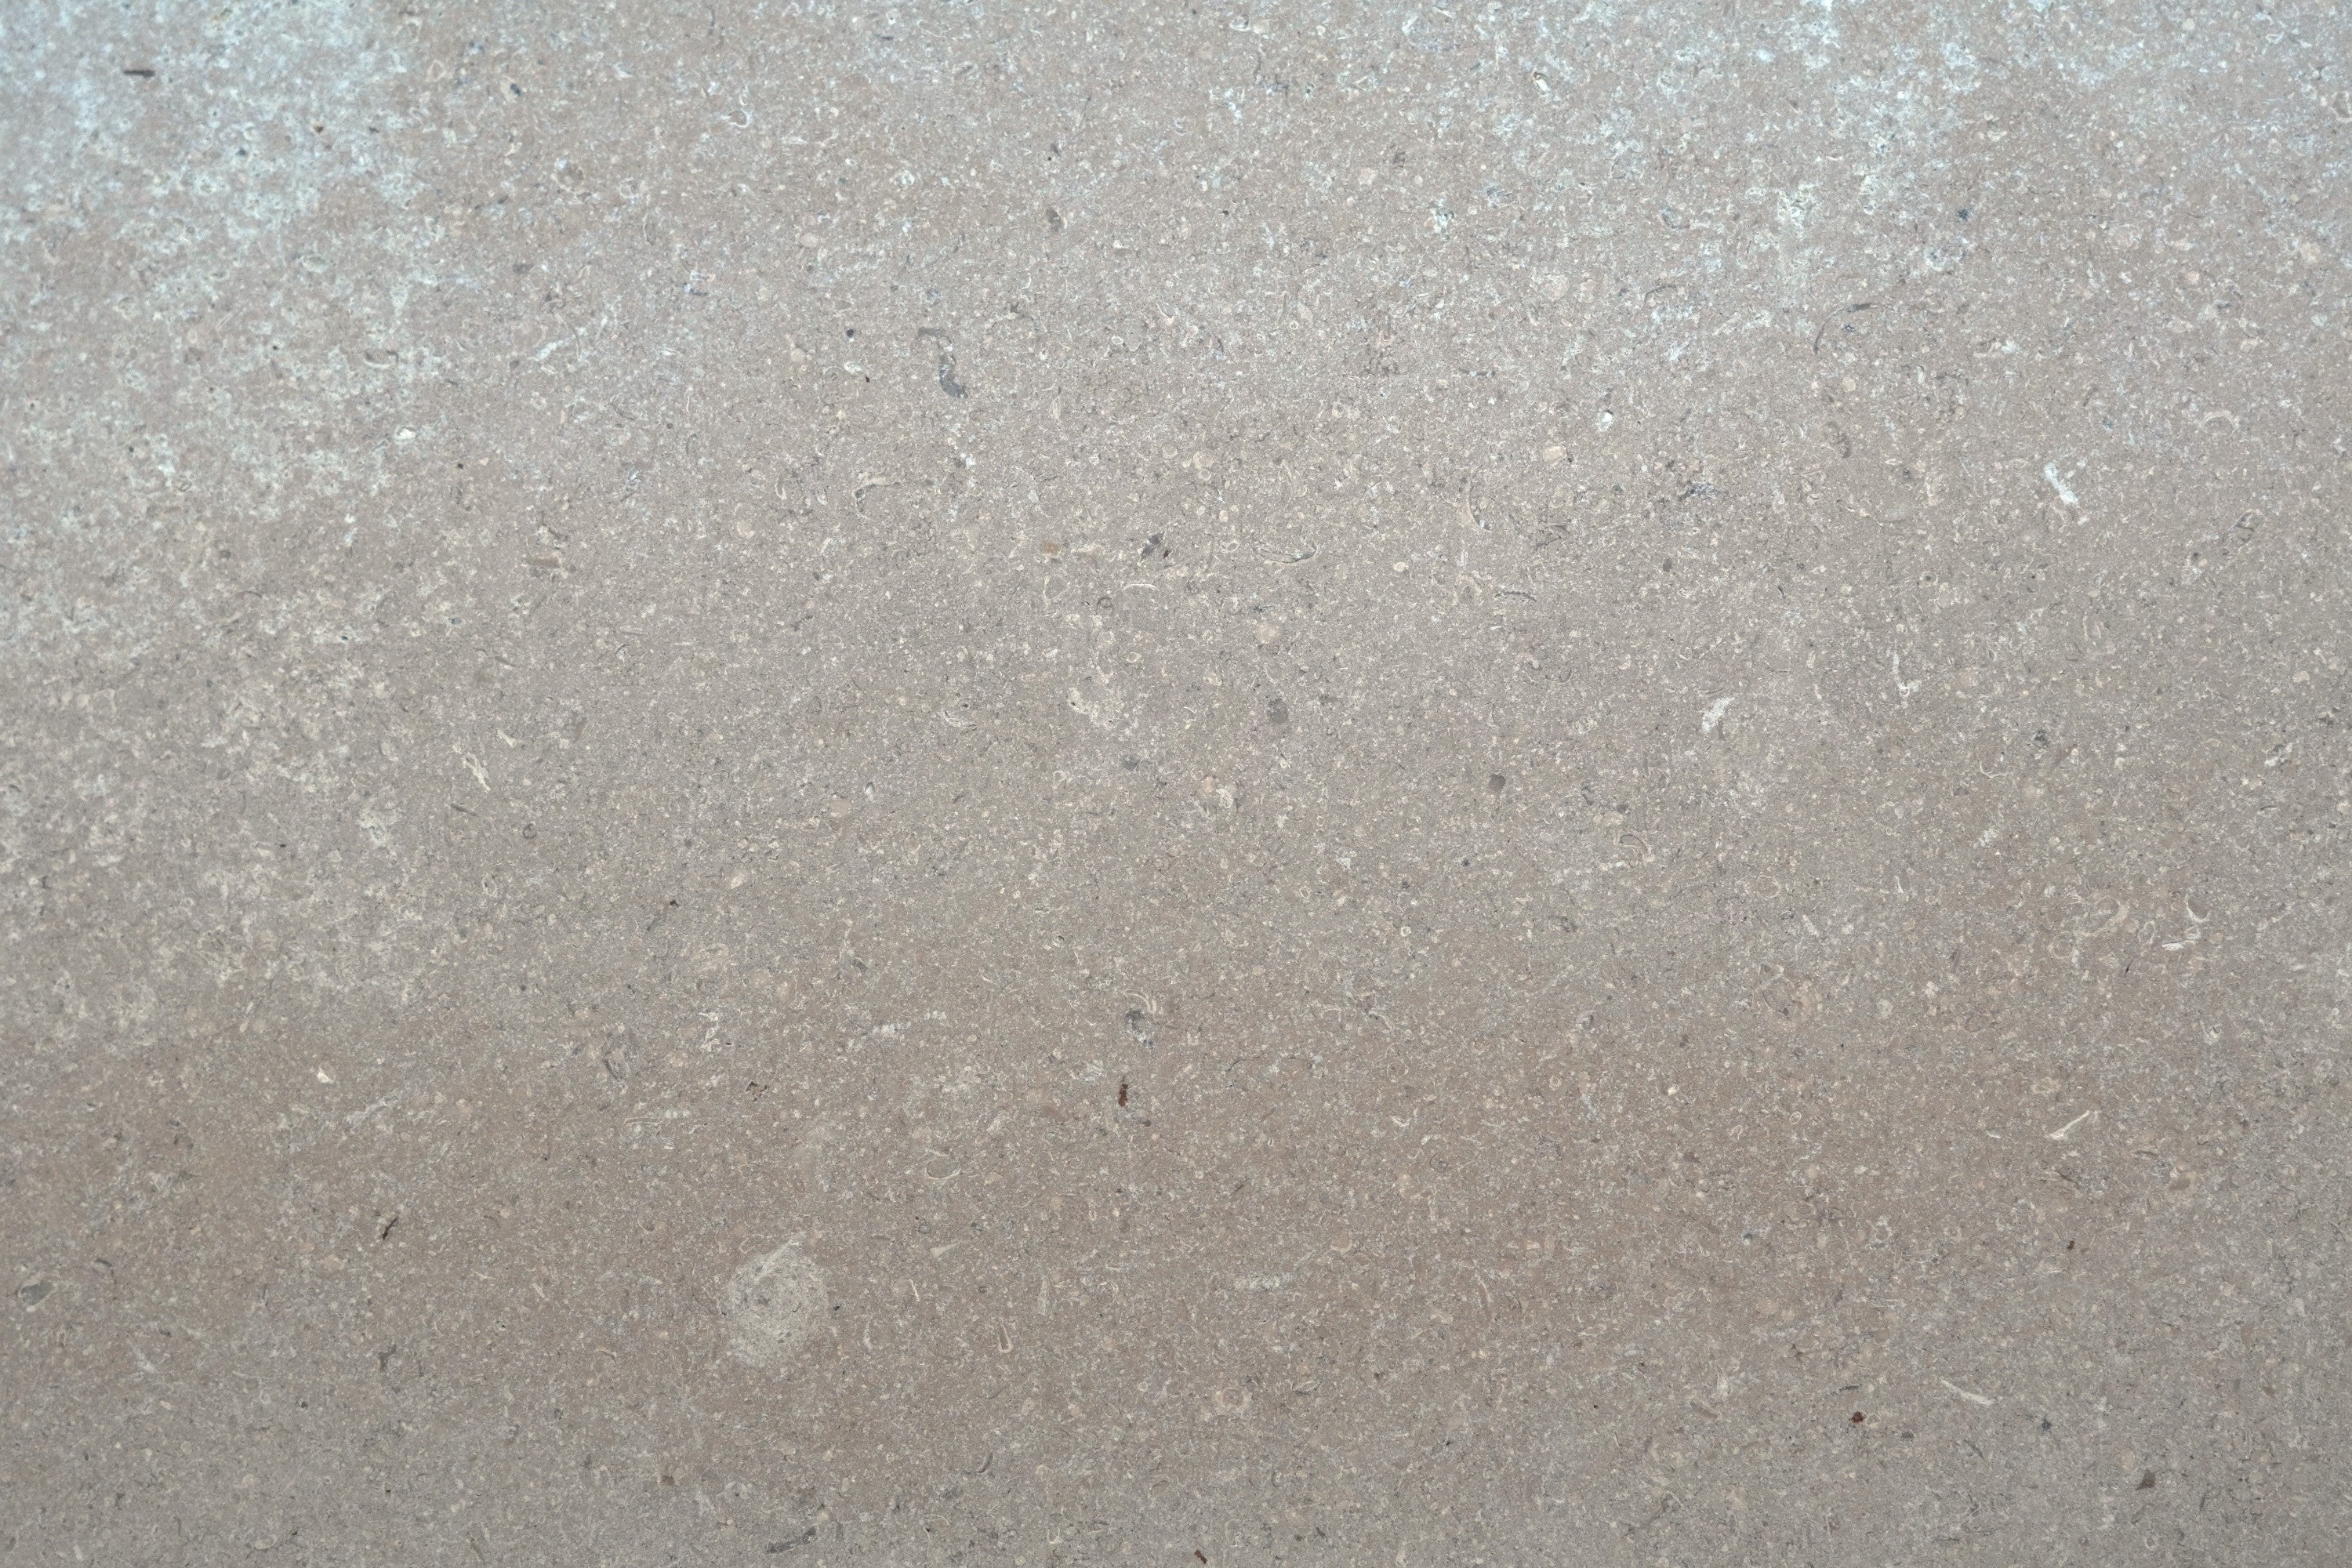 beige tumbled natural limestone field tile champagne taupe width of 16 length of 24 and thickness of 0.625 sold to you by surface group international